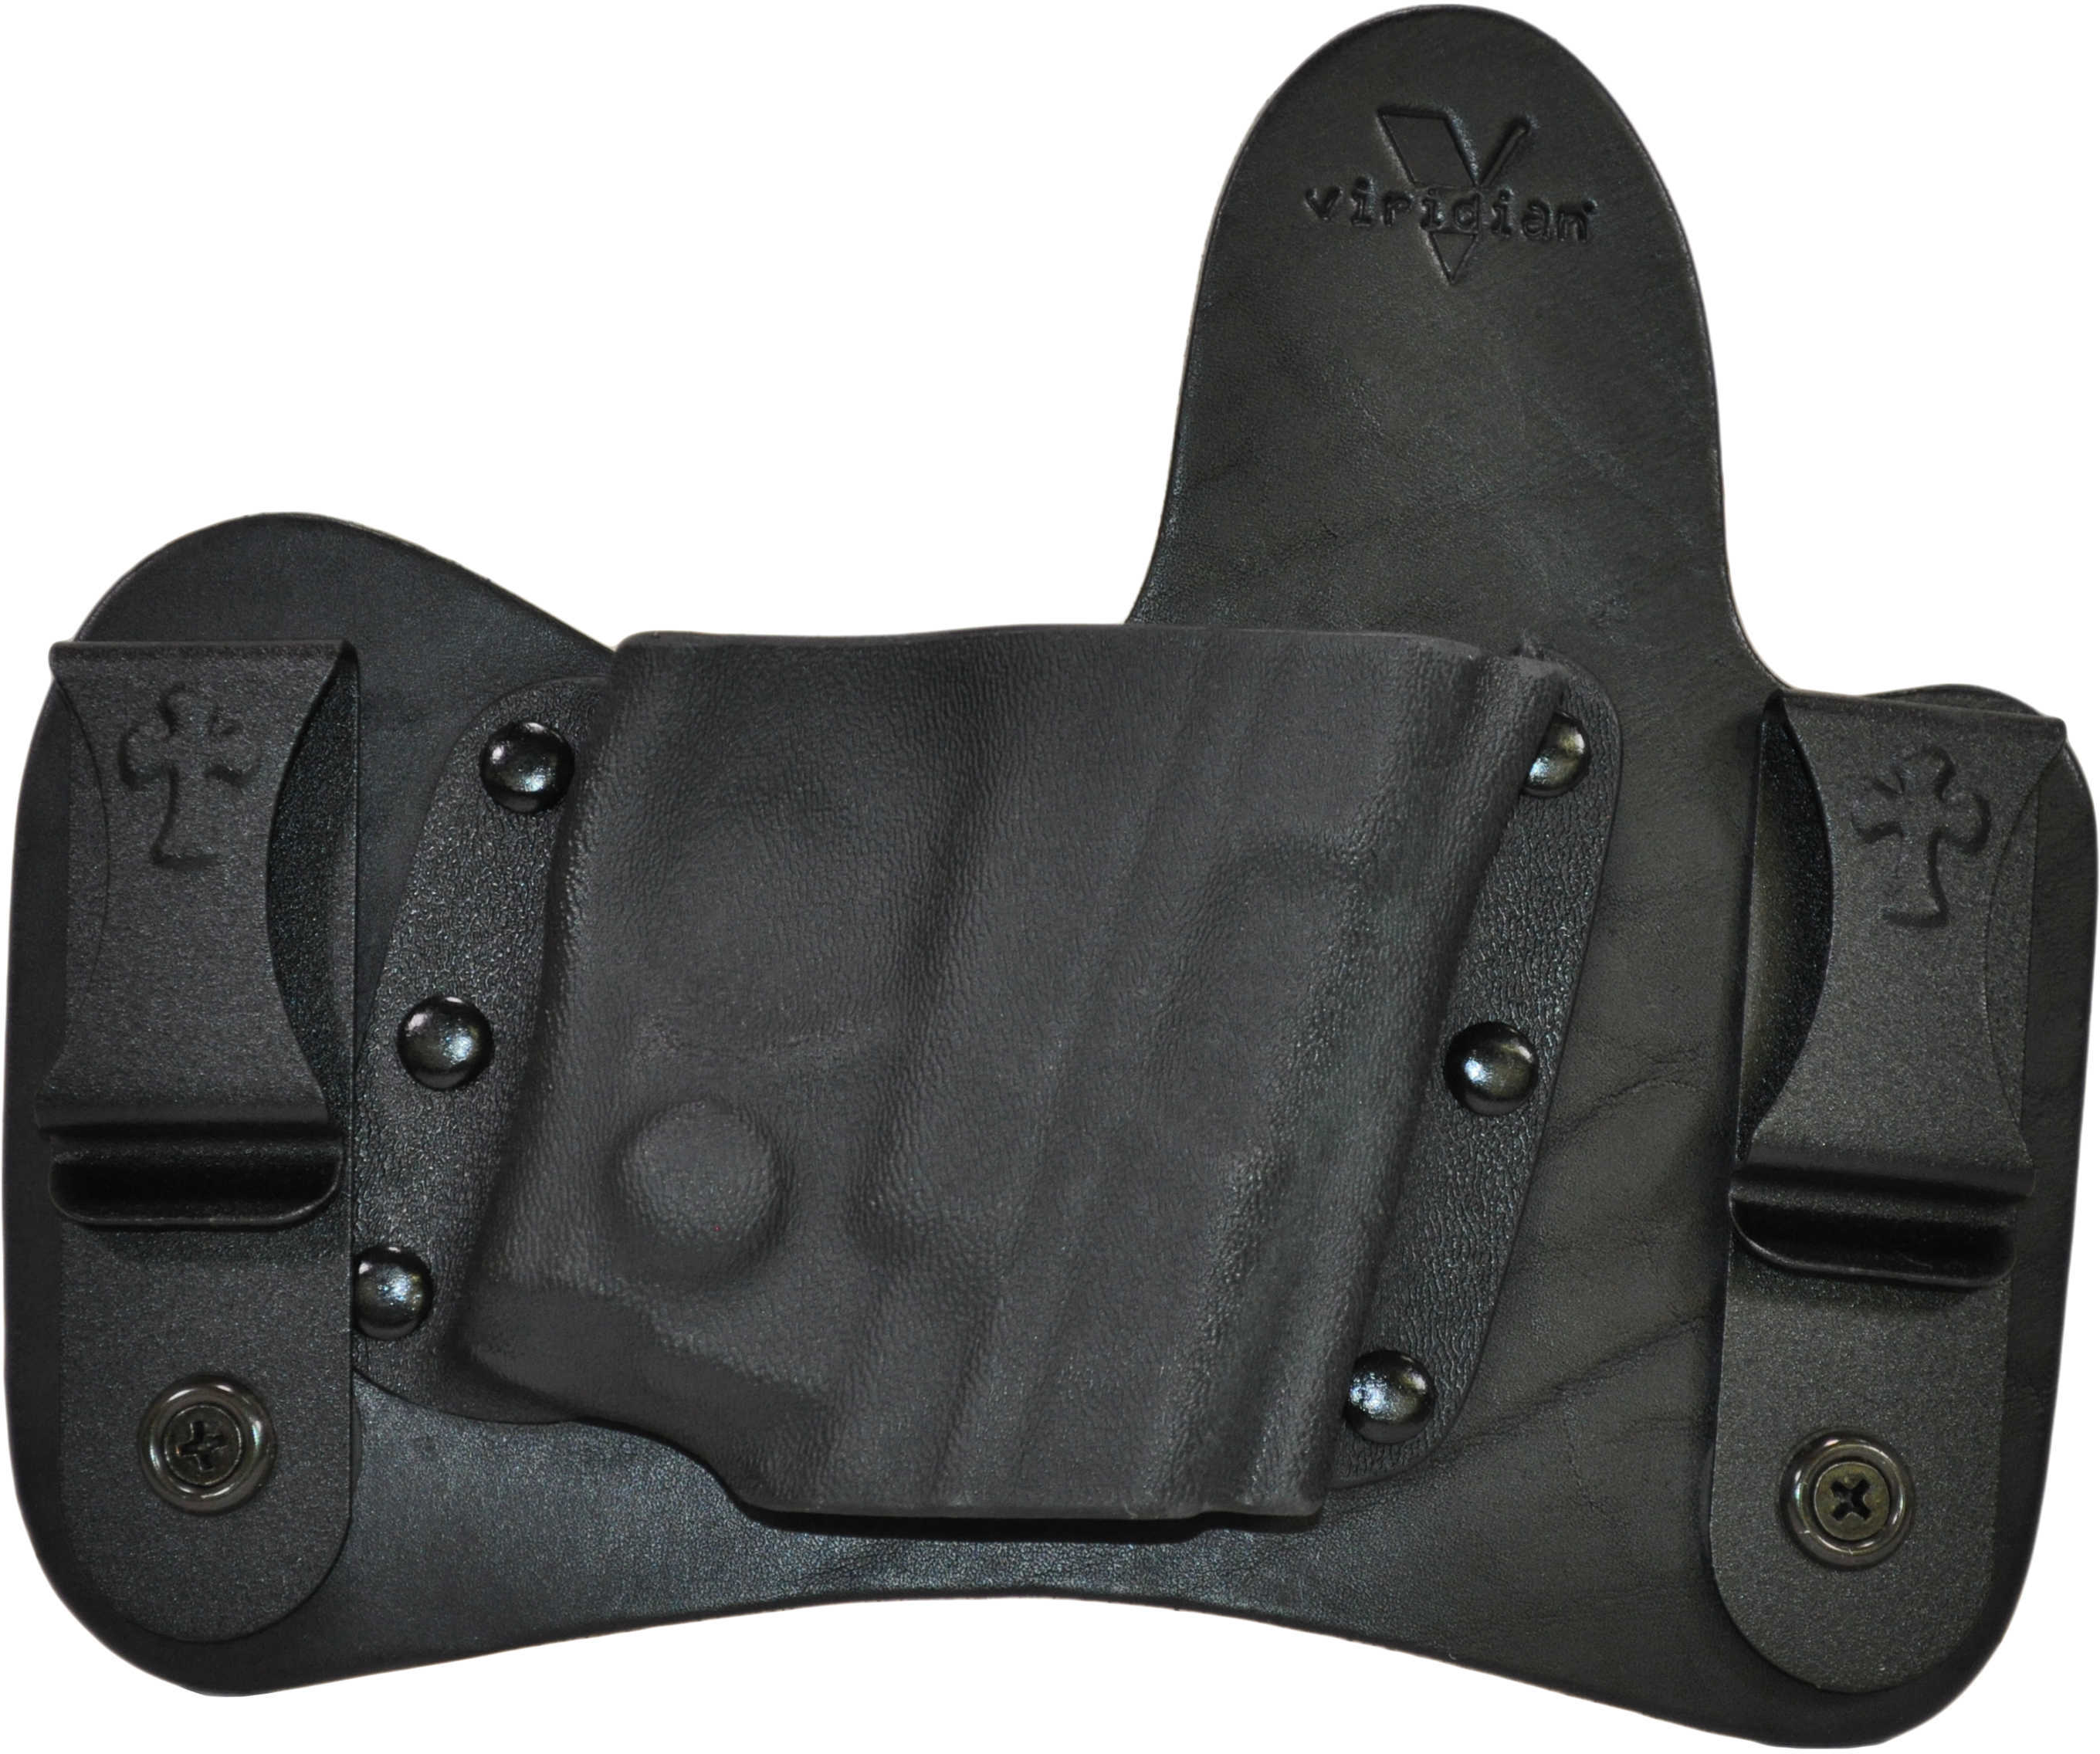 Viridian Weapon Technologies Minituck IWB Holster Smith & Wesson Shield, Right Hand, Black Md: 950-0057